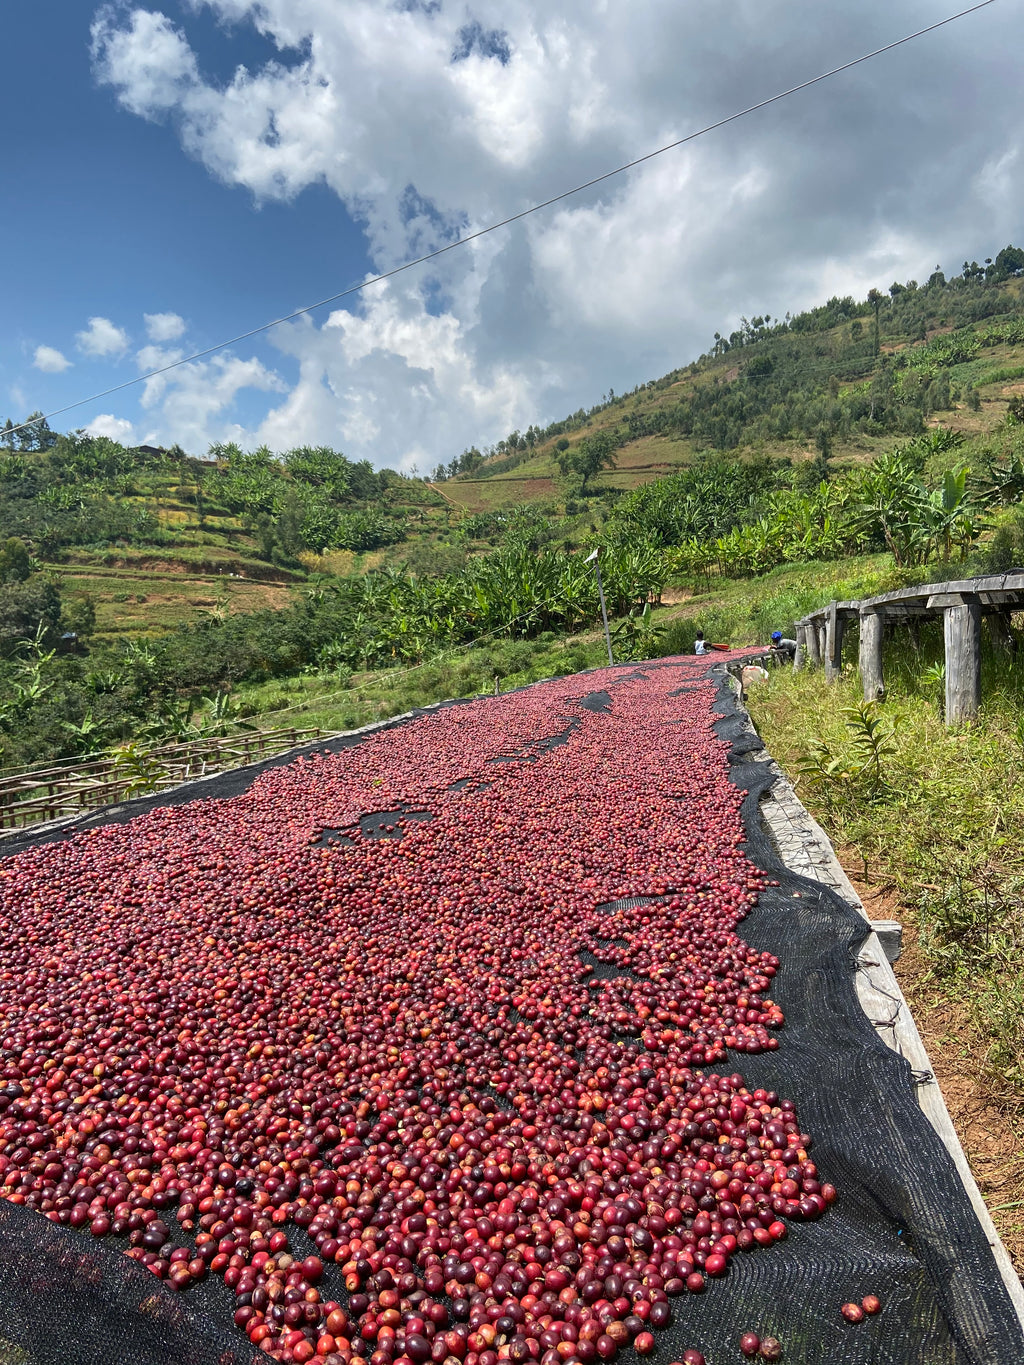 Coffee drying on raised African beds